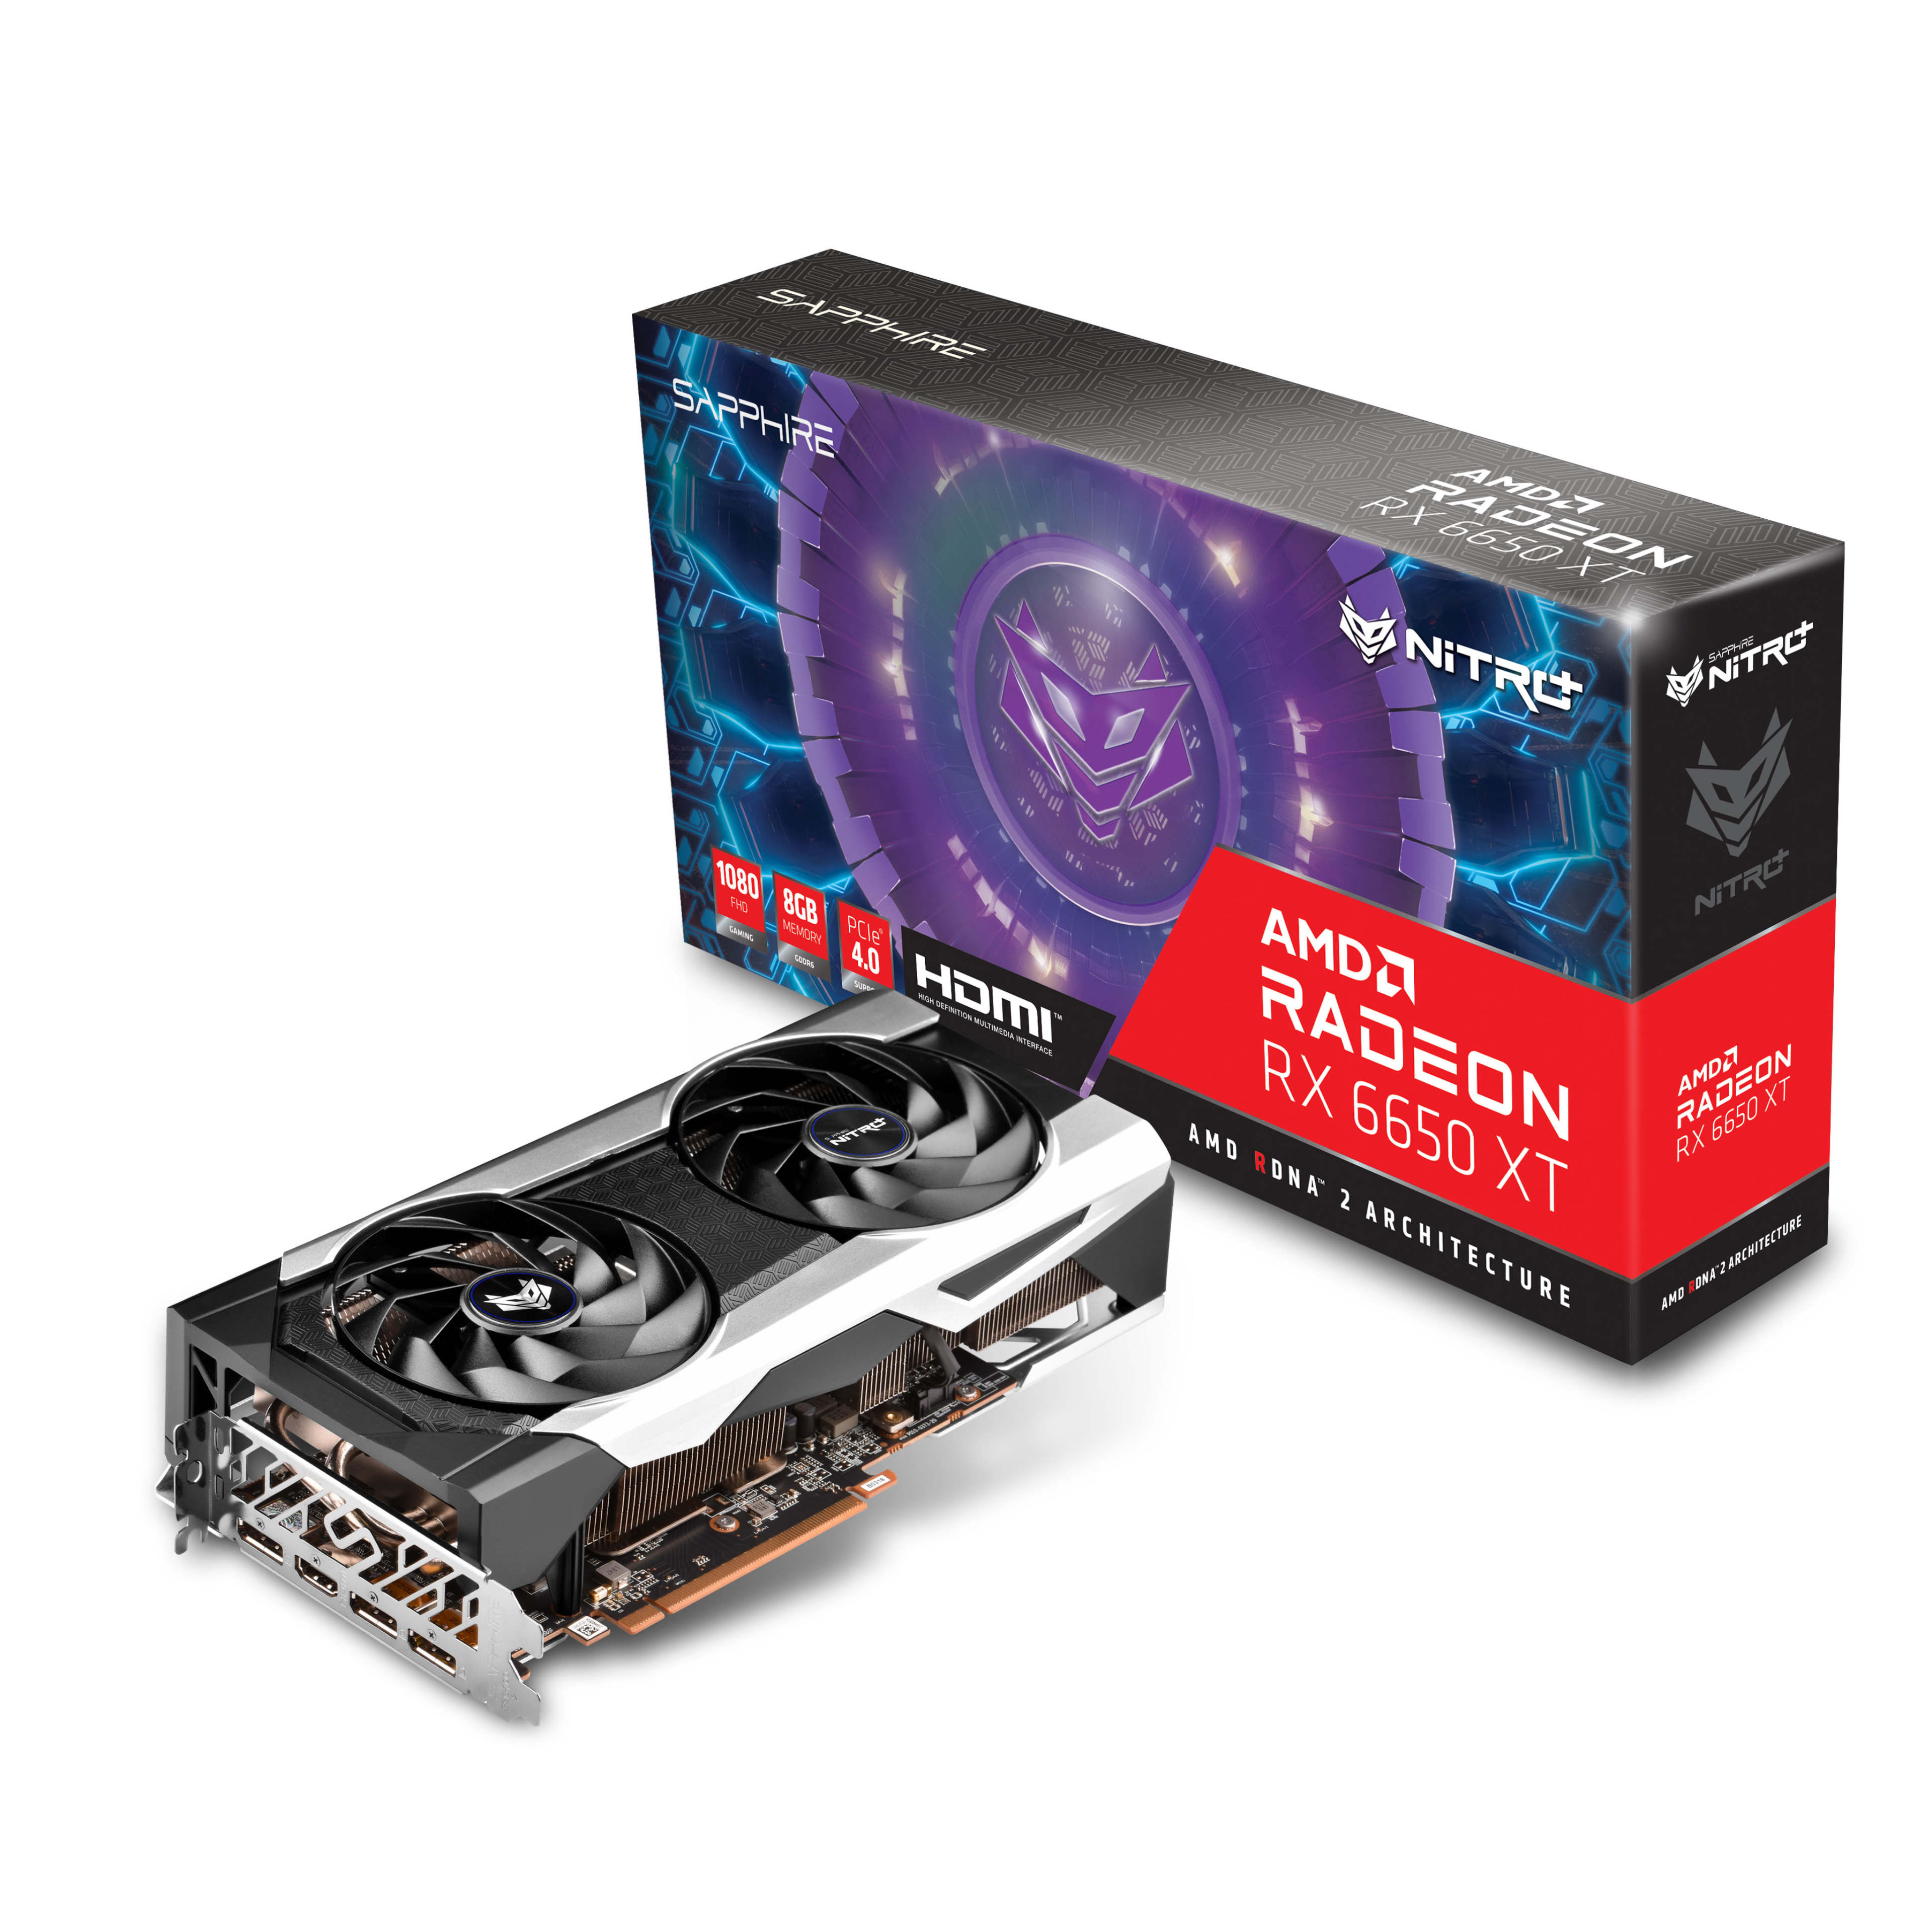 This Sapphire RX 6650 XT can be yours from Overclockers for just £230